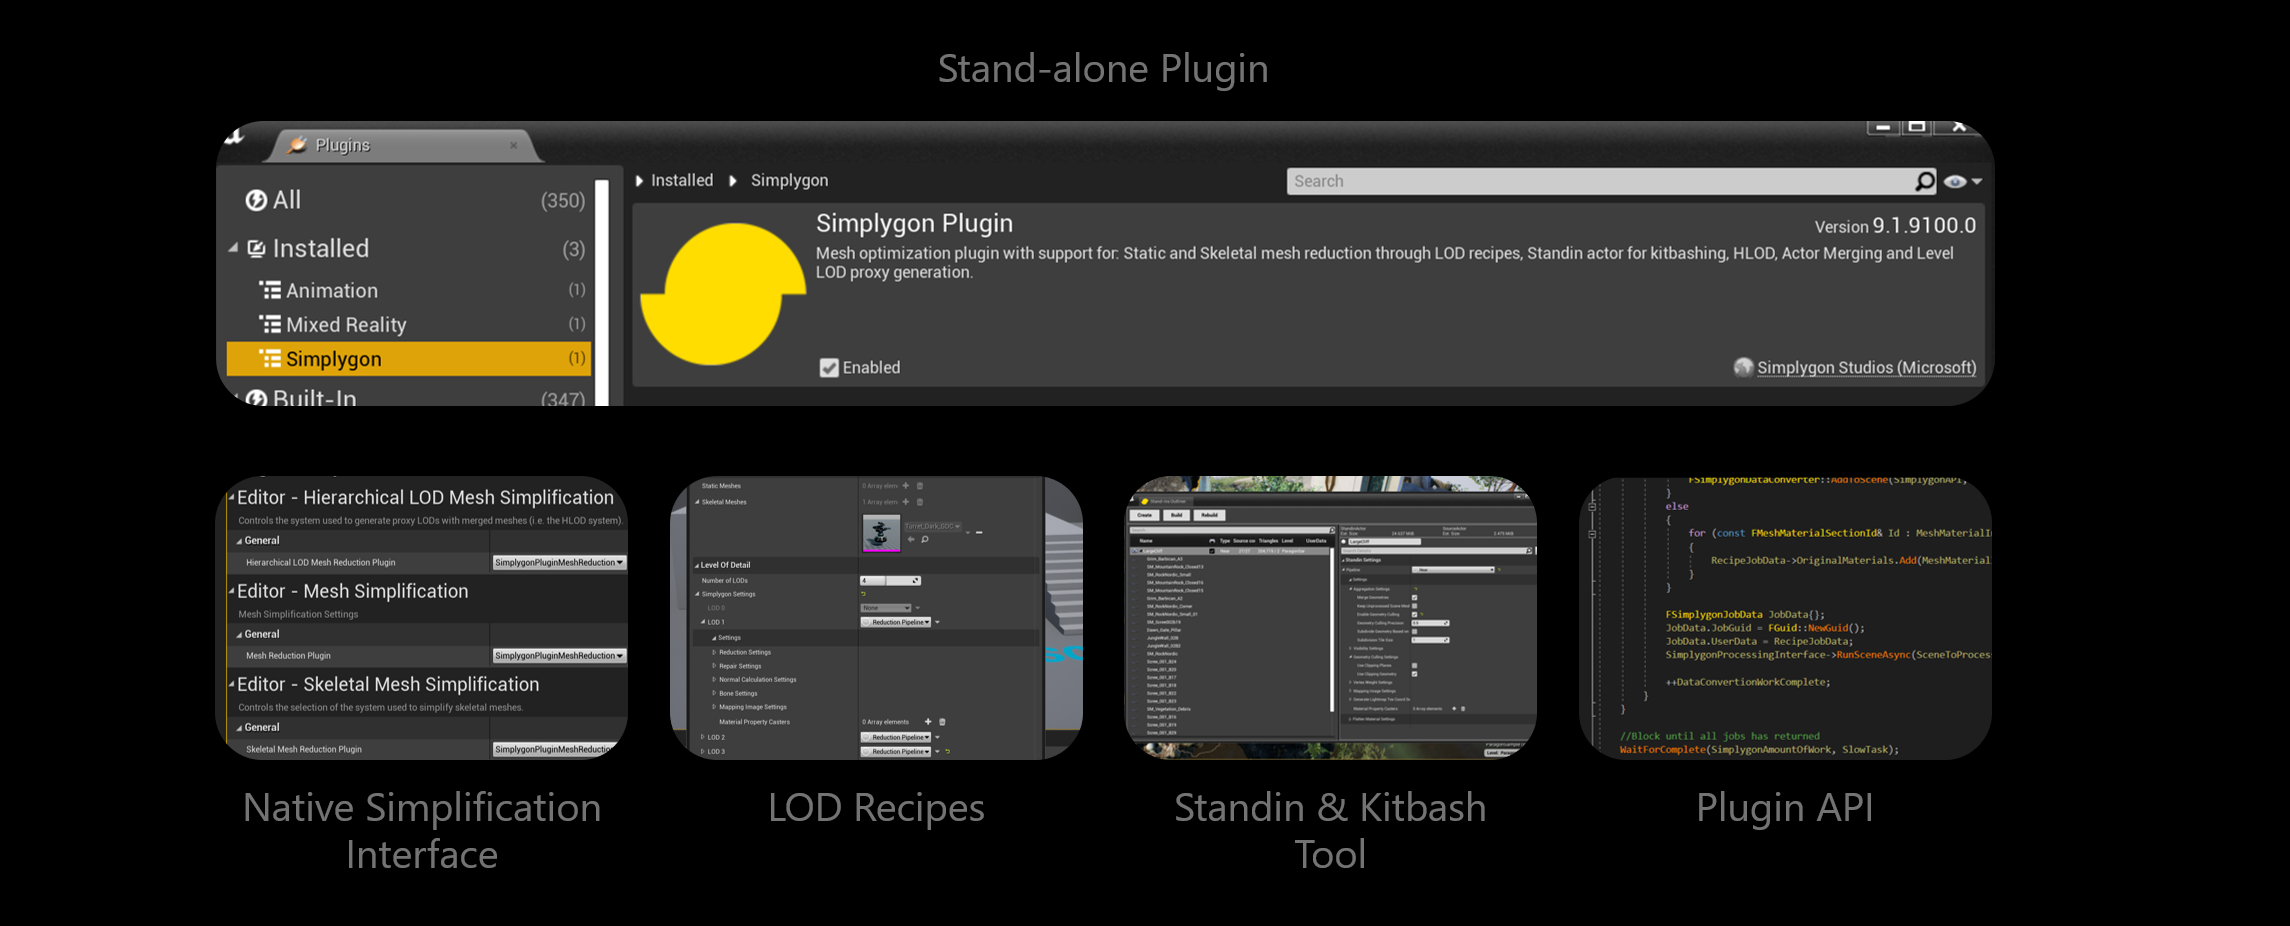 Overview of Simplygon Unreal Engine 4 plugin; Native Simplification interface, LOD Recipes, Standin & Kitbash tool and Plugin API.